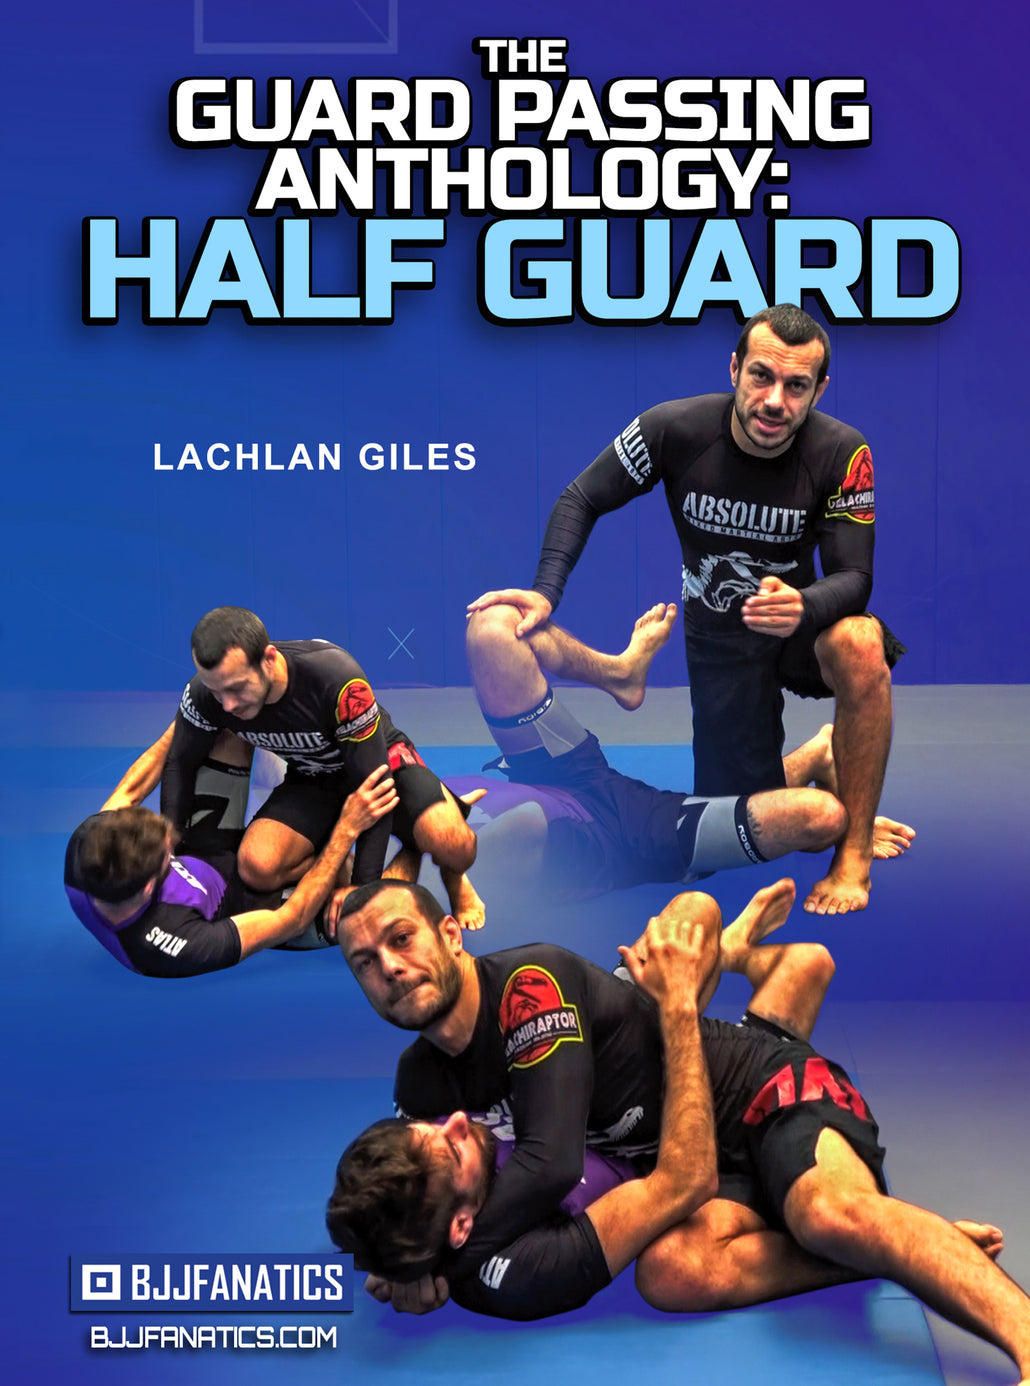 The Guard Passing Anthology: Half Guard by Lachlan Giles